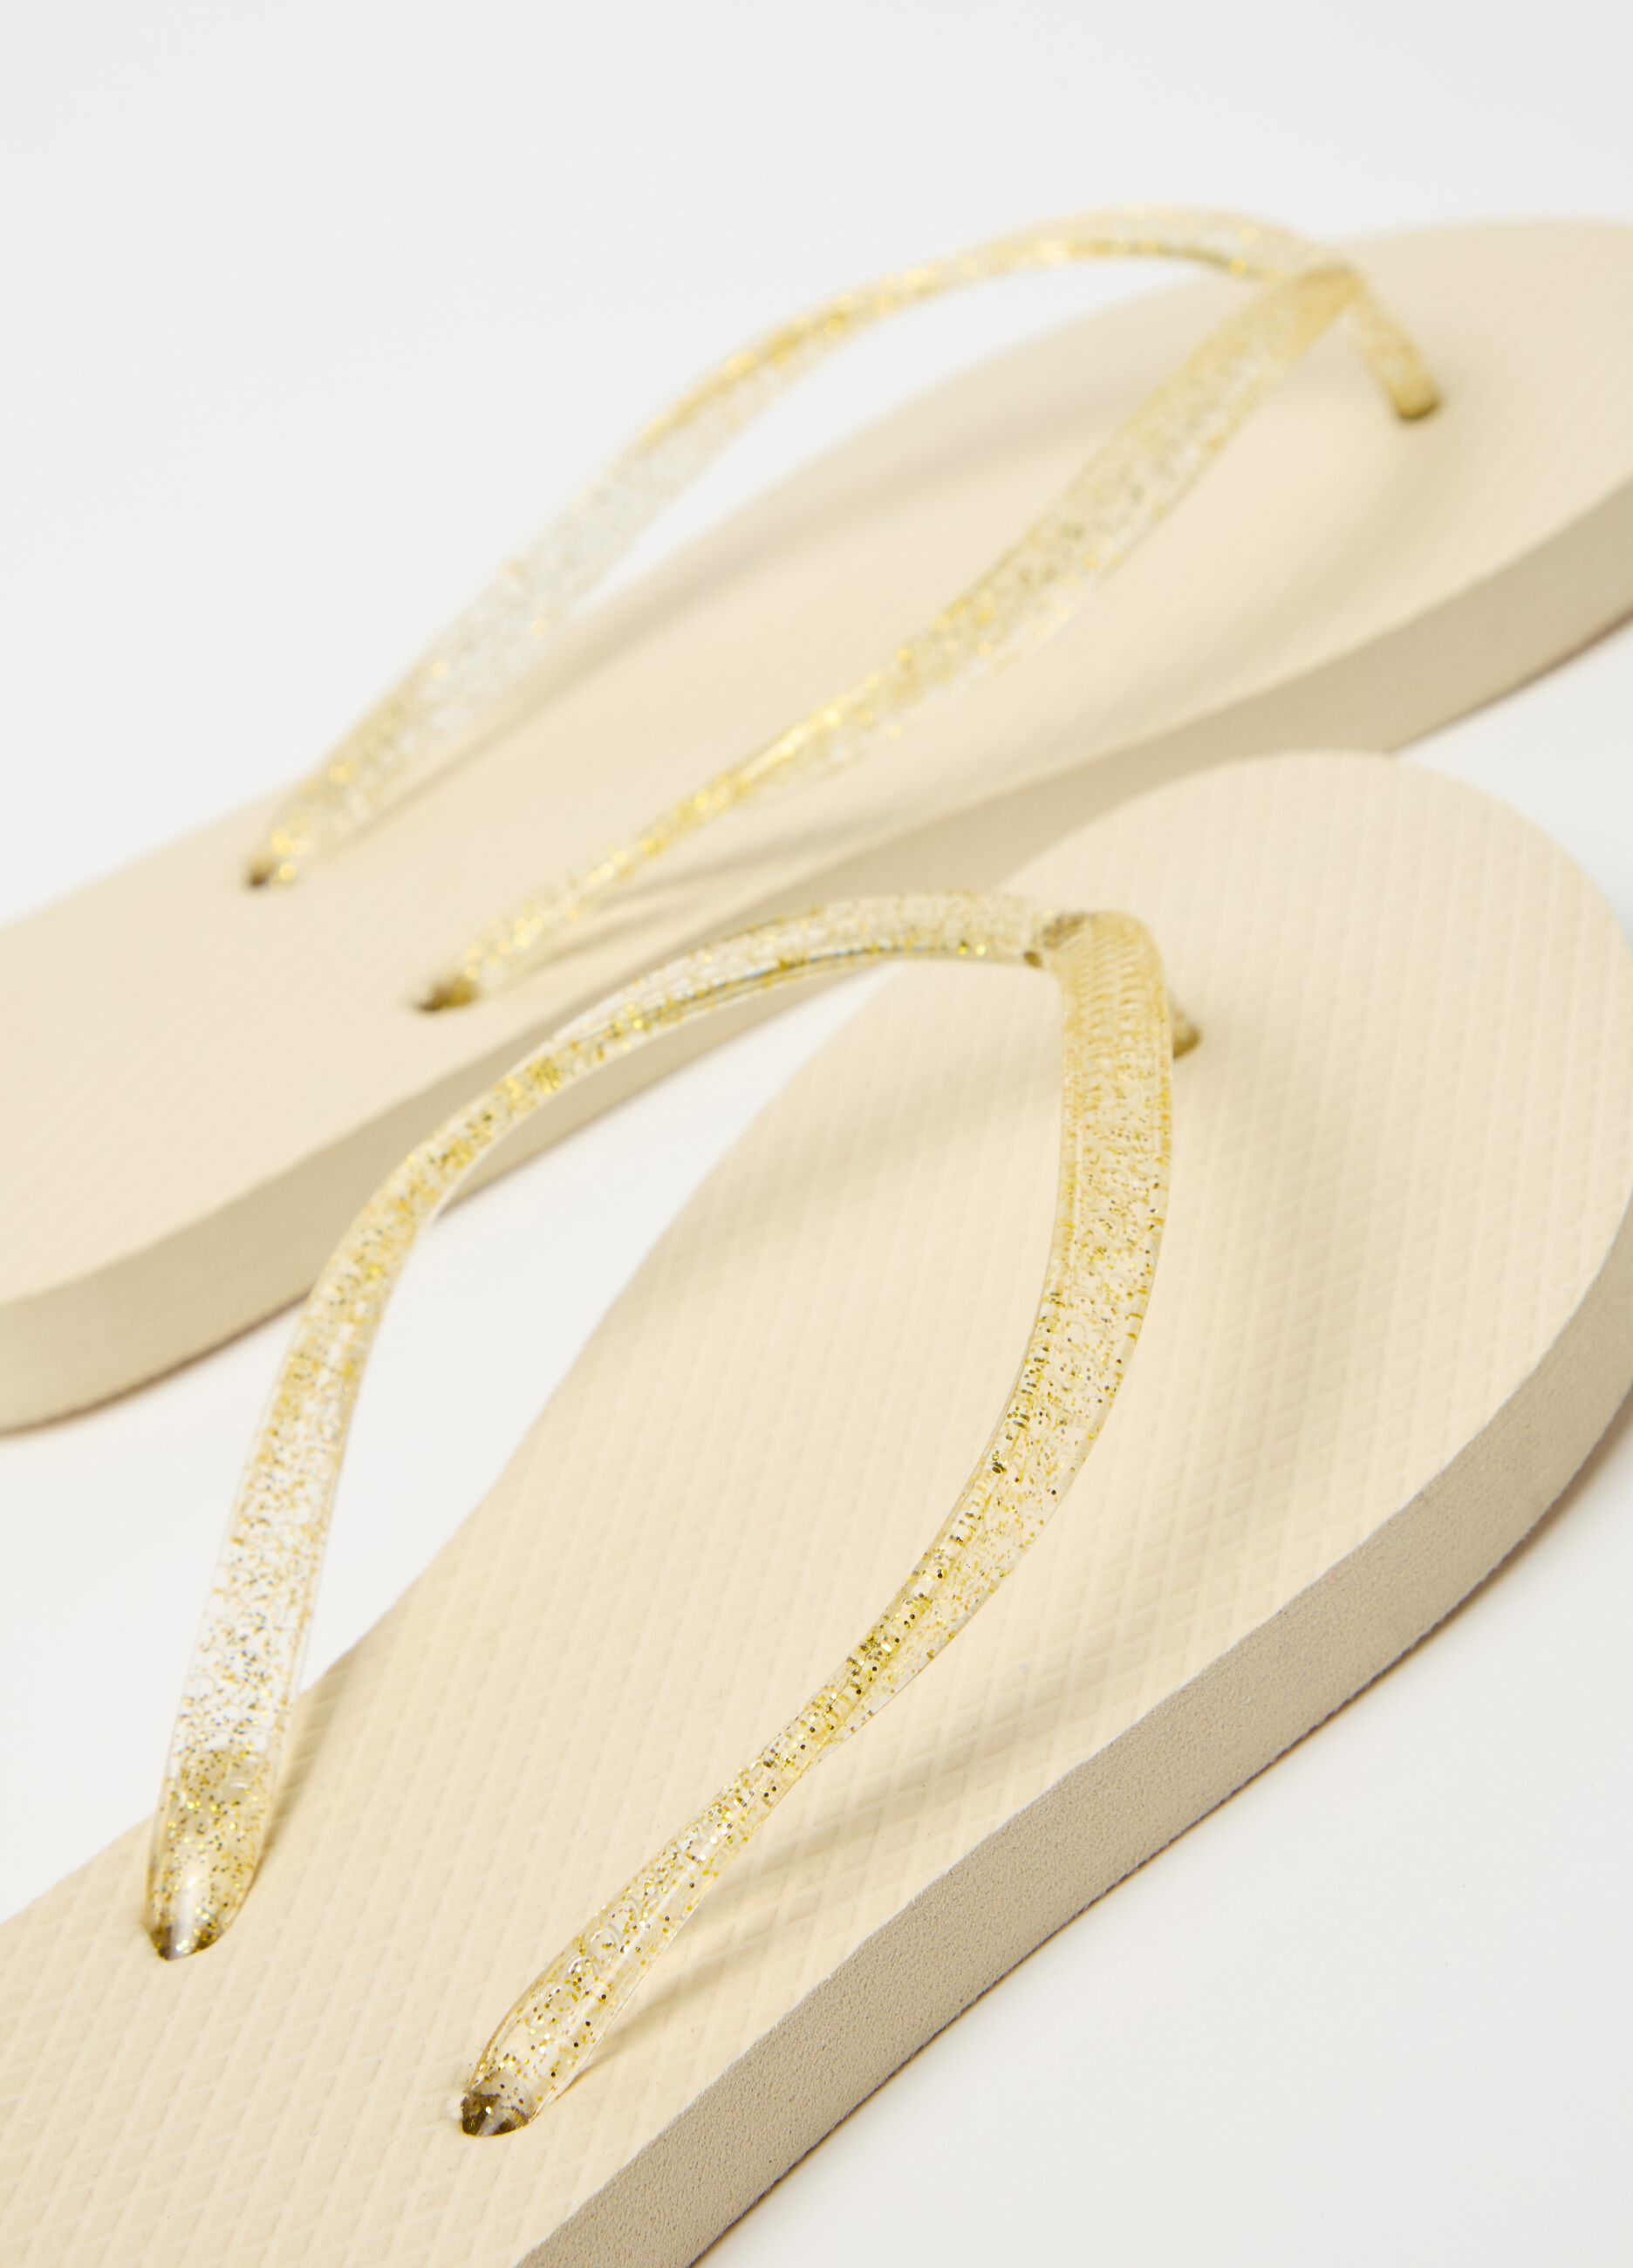 Thong sandals with glitter bands